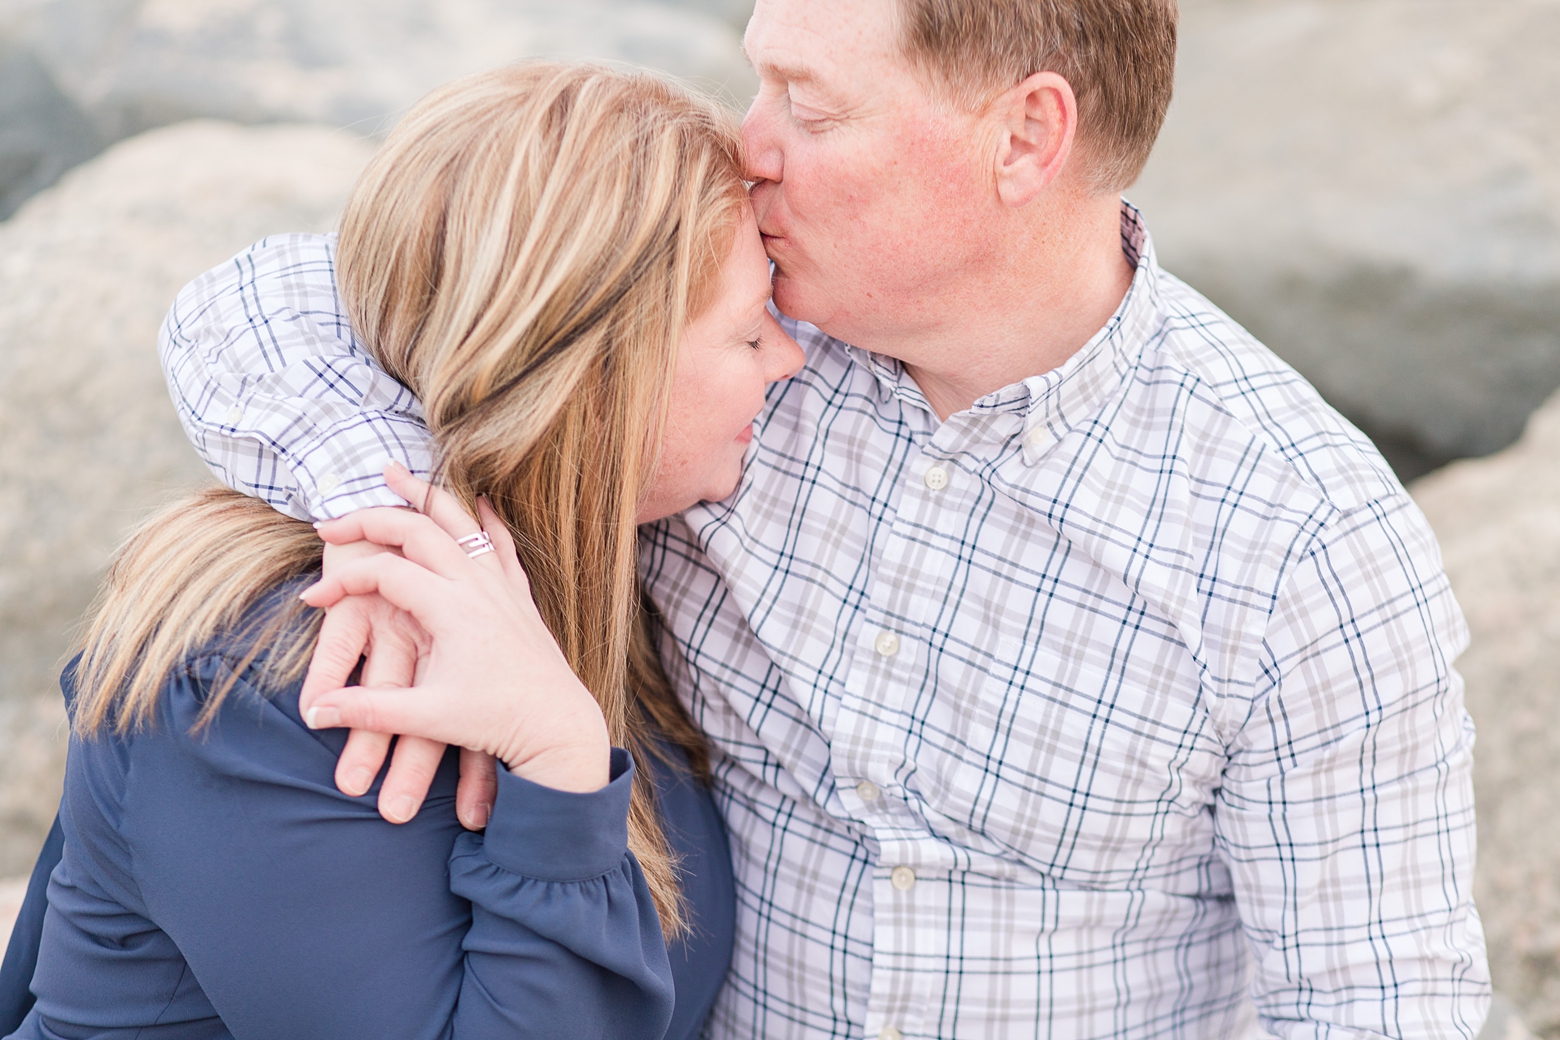 Virginia Beach Oceanfront Engagement Photography by Angie McPherson Photography